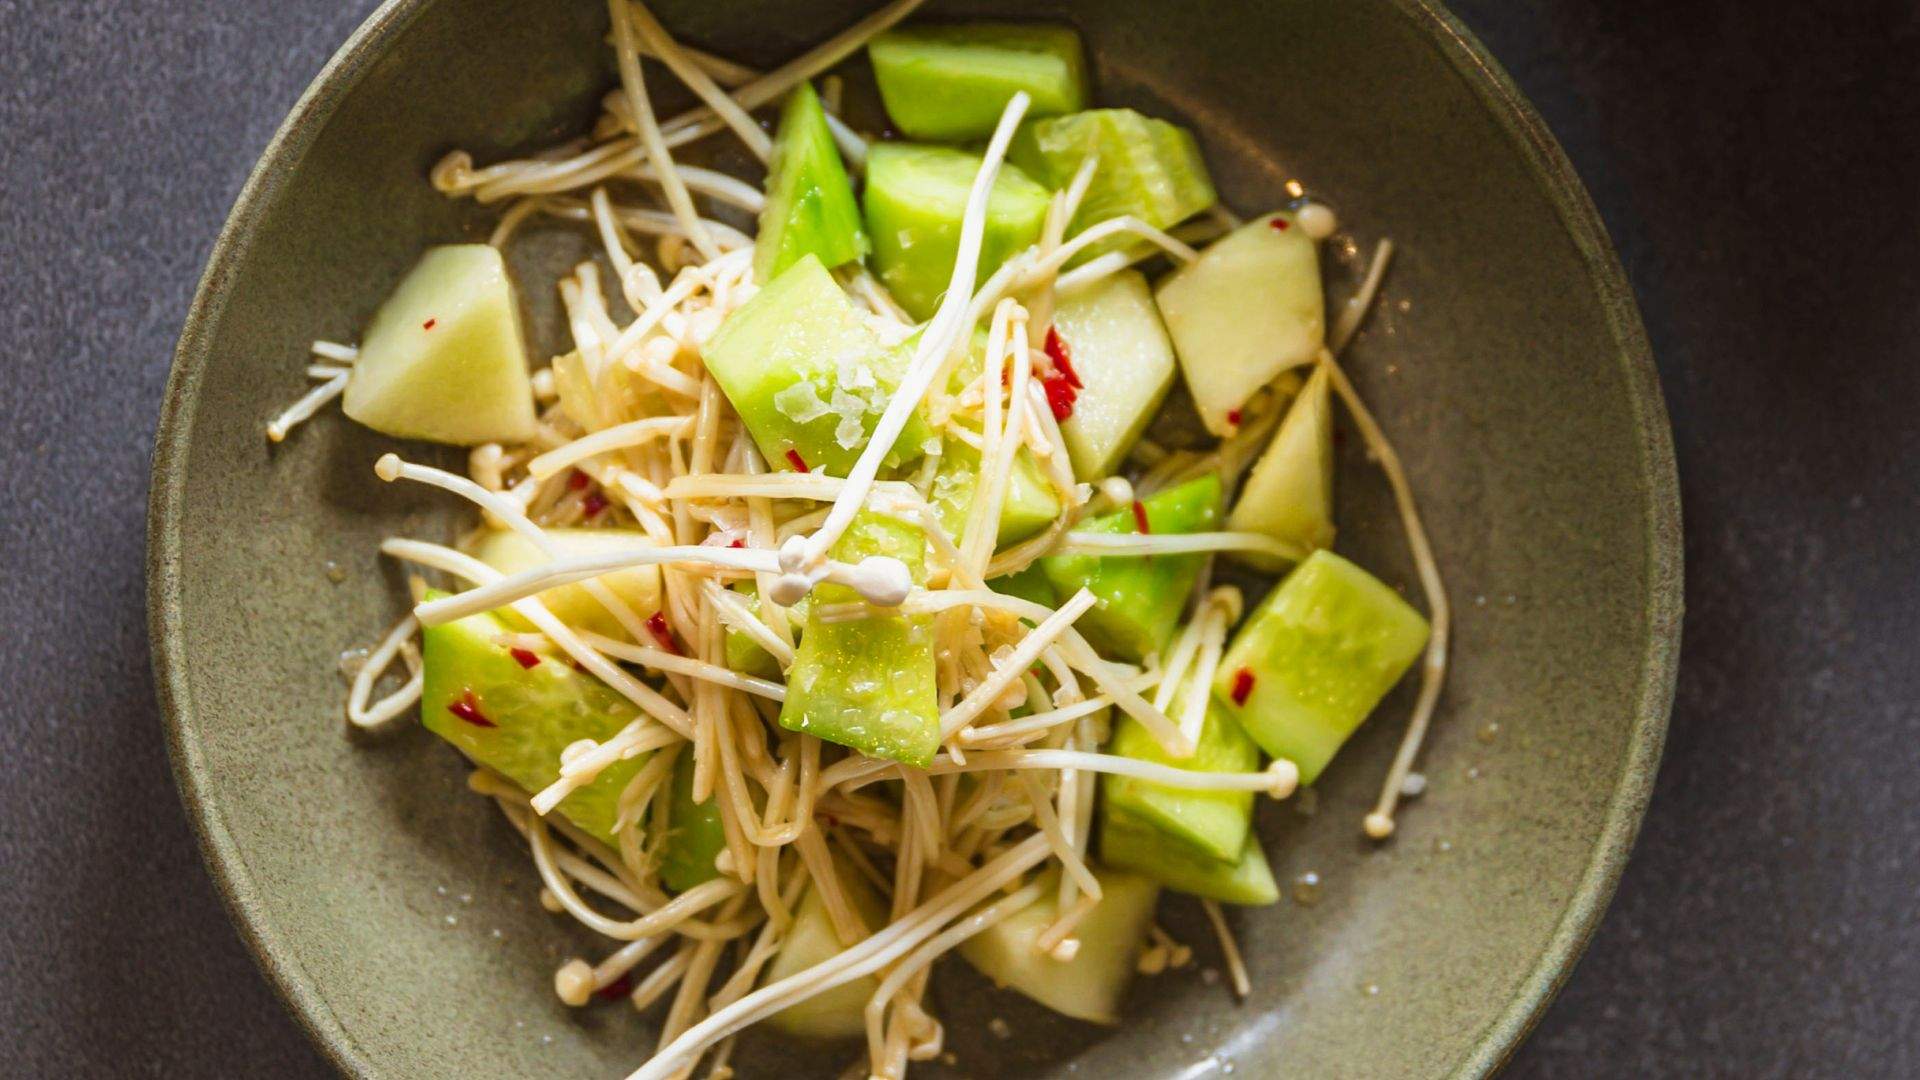 Cucumber, piel de sapo & enoki salad with hot & sour dressing & rice noodles from Mitch Orr's monthly menu takeover for November 2023 at Two Good Co Cafe.